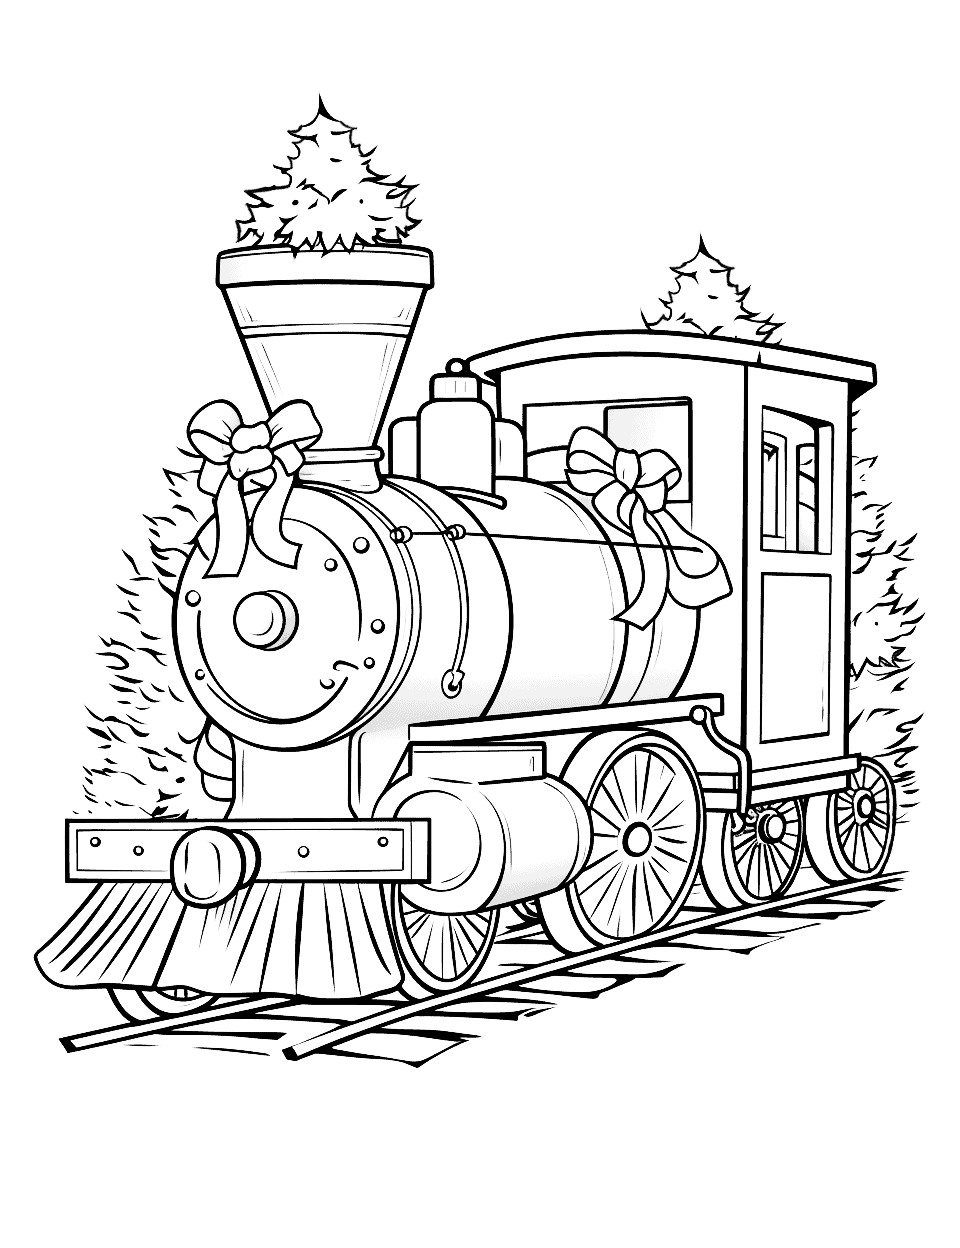 Festive Christmas Train Coloring Page - A festive train delivering presents and spreading Christmas joy.